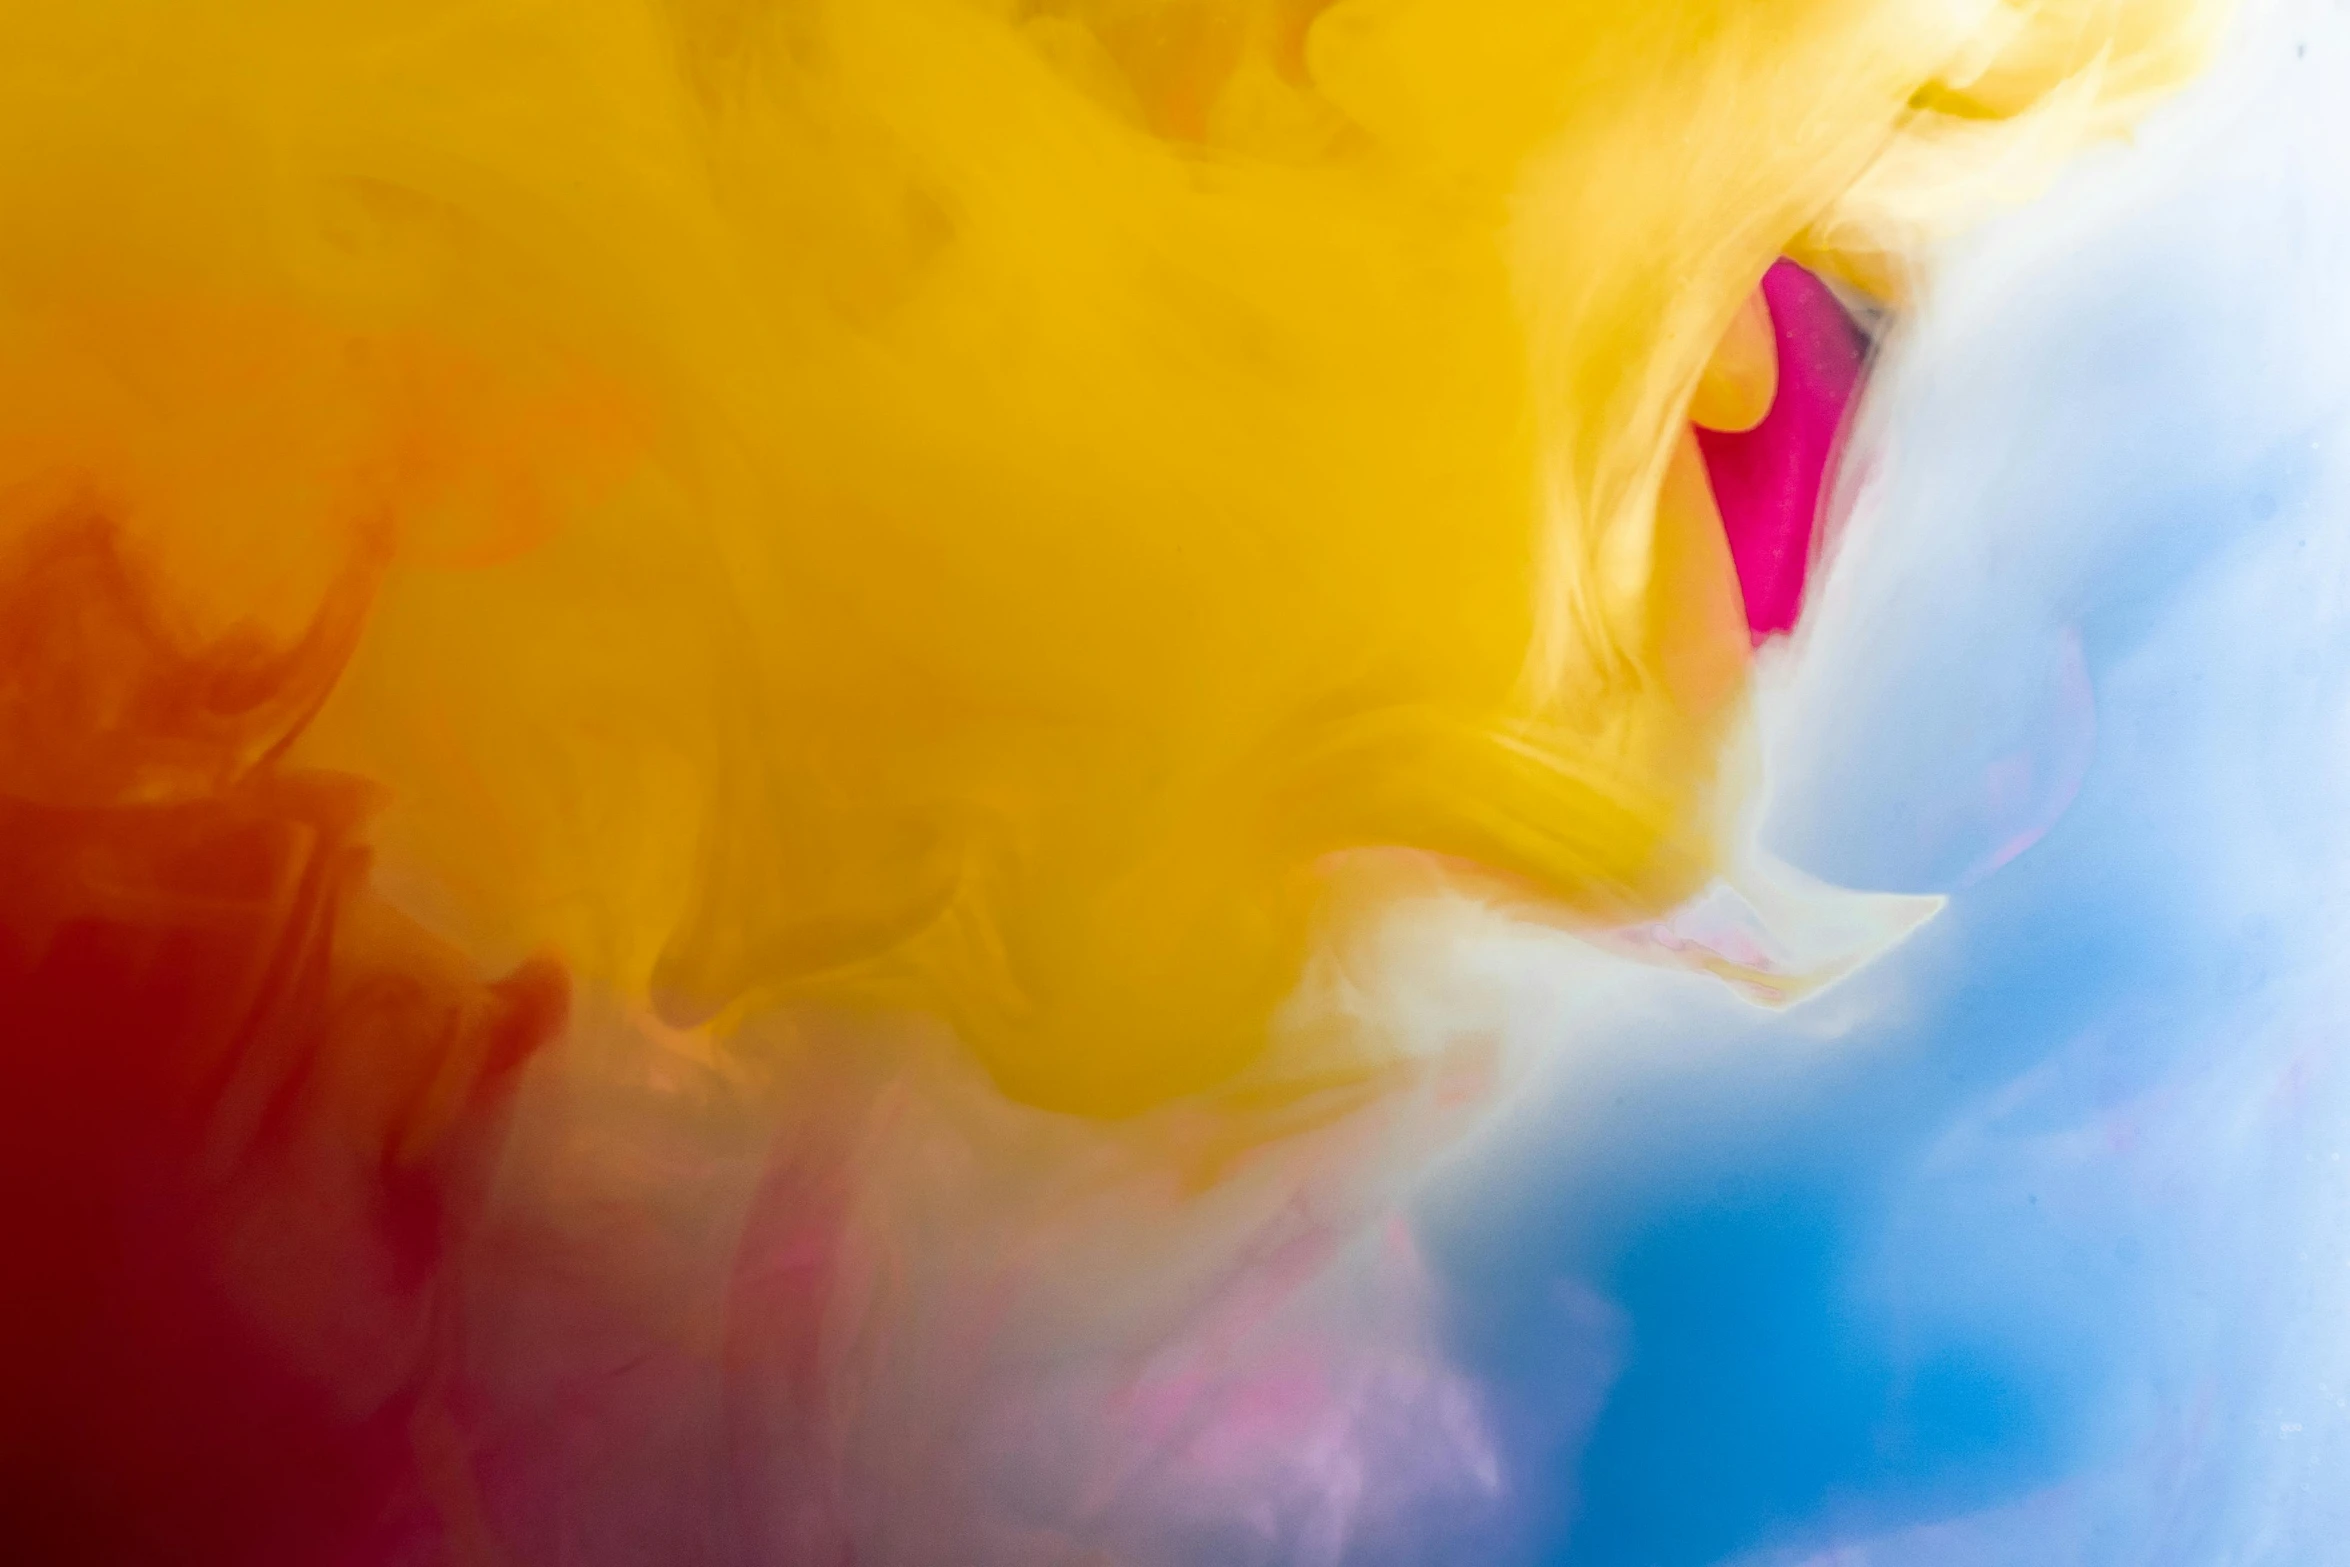 a close up of a person holding a frisbee, inspired by Kim Keever, unsplash, abstract expressionism, colors: yellow, face submerged in colorful oils, liquid clouds, cmyk portrait